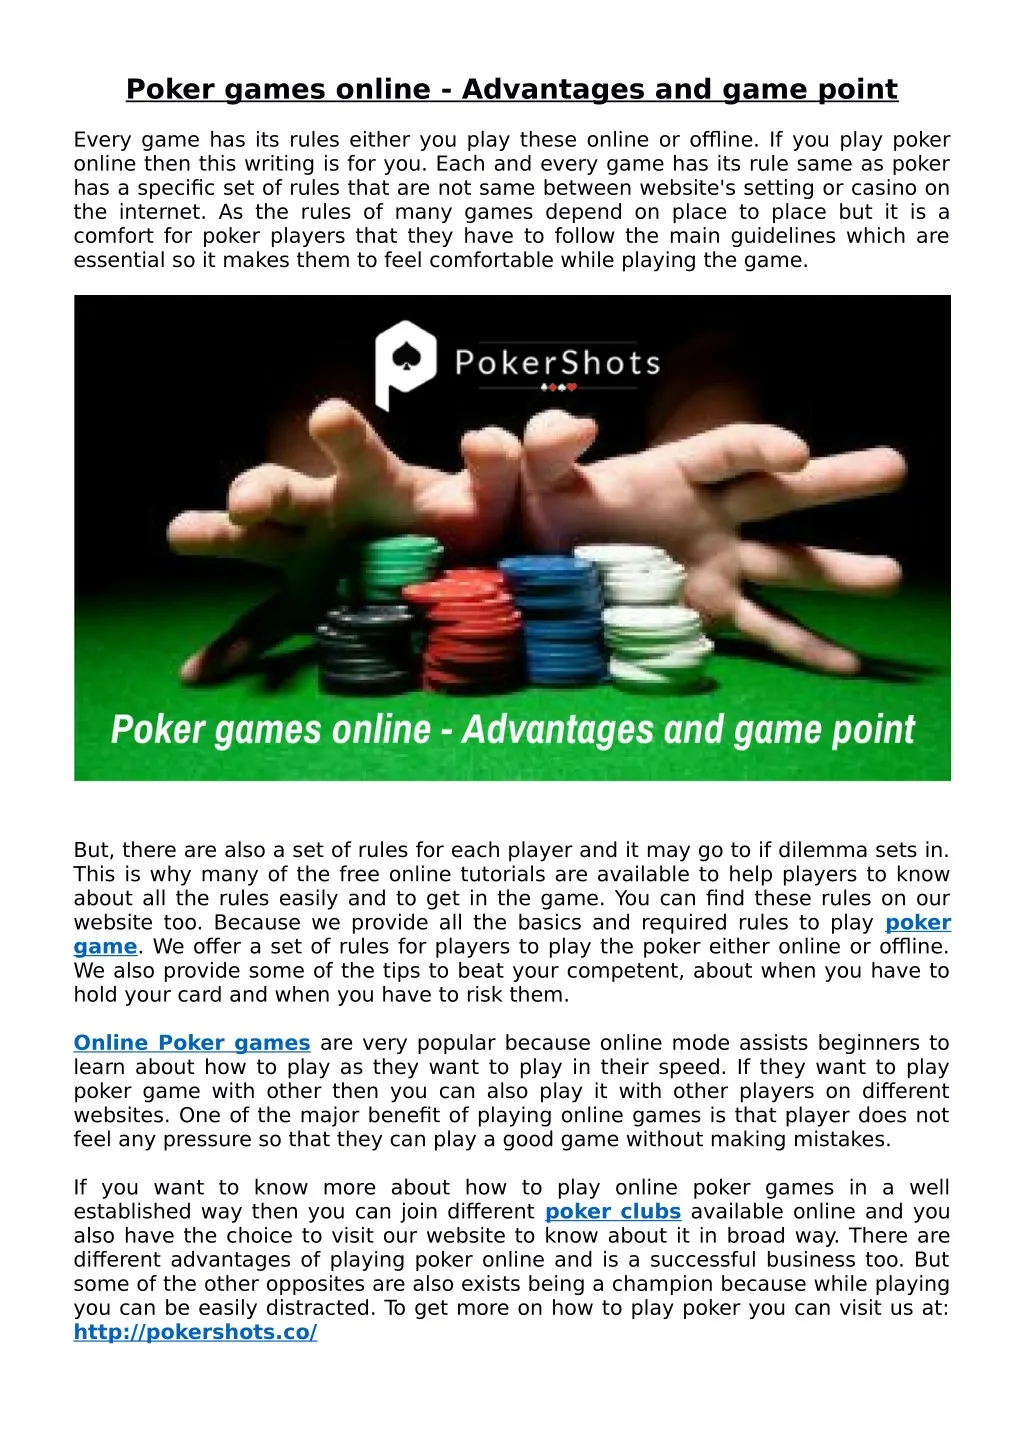 poker games online advantages and game point n.